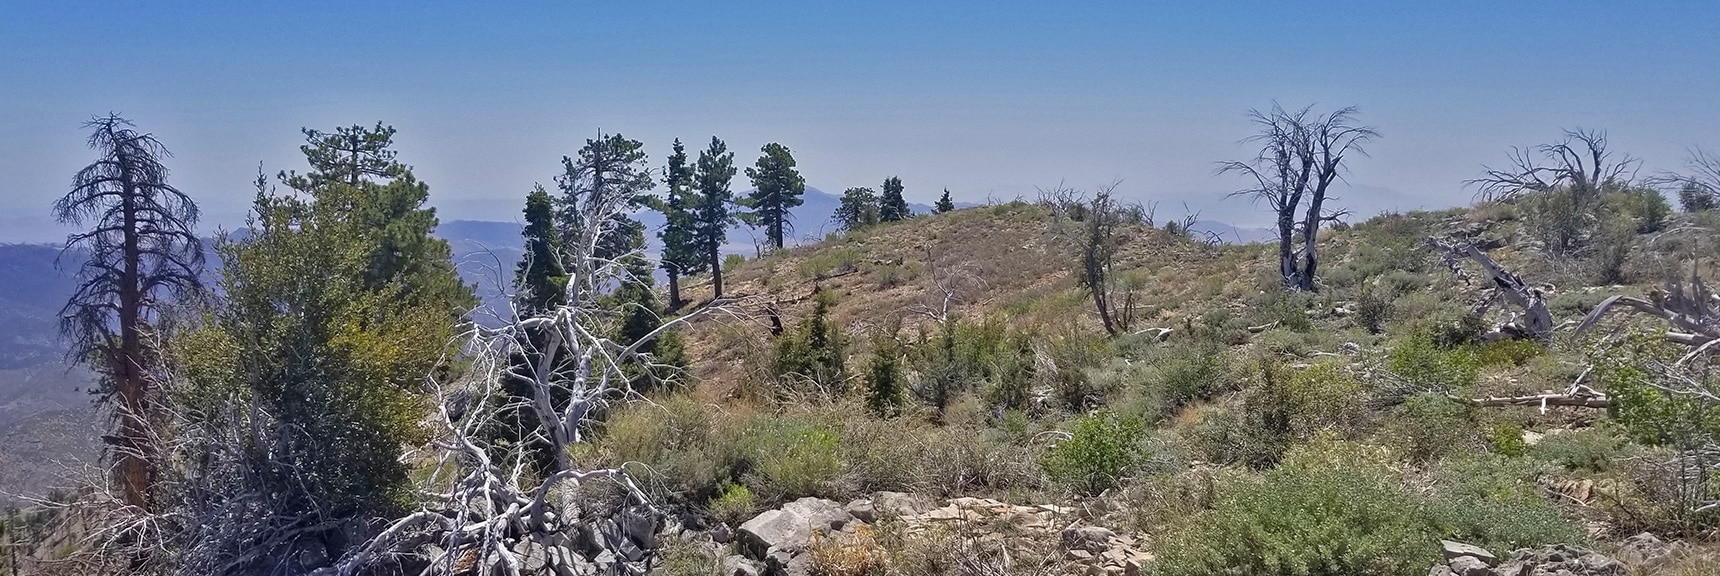 Sexton Ridge at 9,000ft. A Few Stray Bristlecone Pines Begin to Appear in the Forest | Griffith Peak Southern Approach from Sexton Ridge Above Lovell Canyon, Nevada